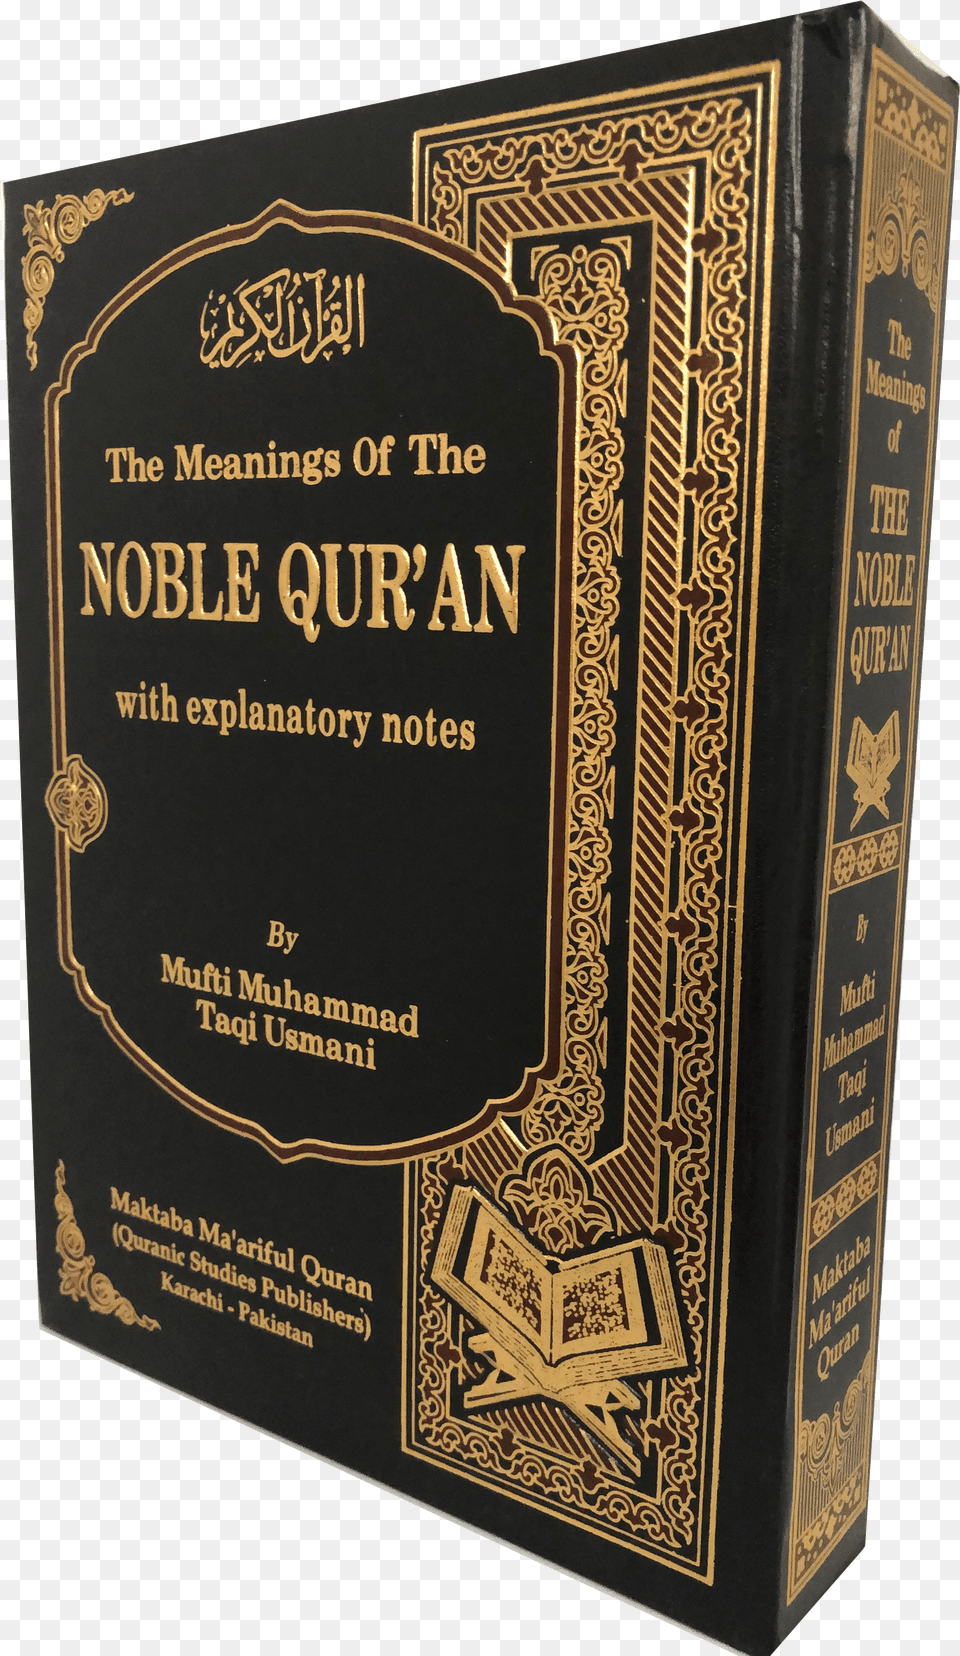 The Meaning Of The Noble Qur An By Mufti Muhammad Taqi Commemorative Plaque Png